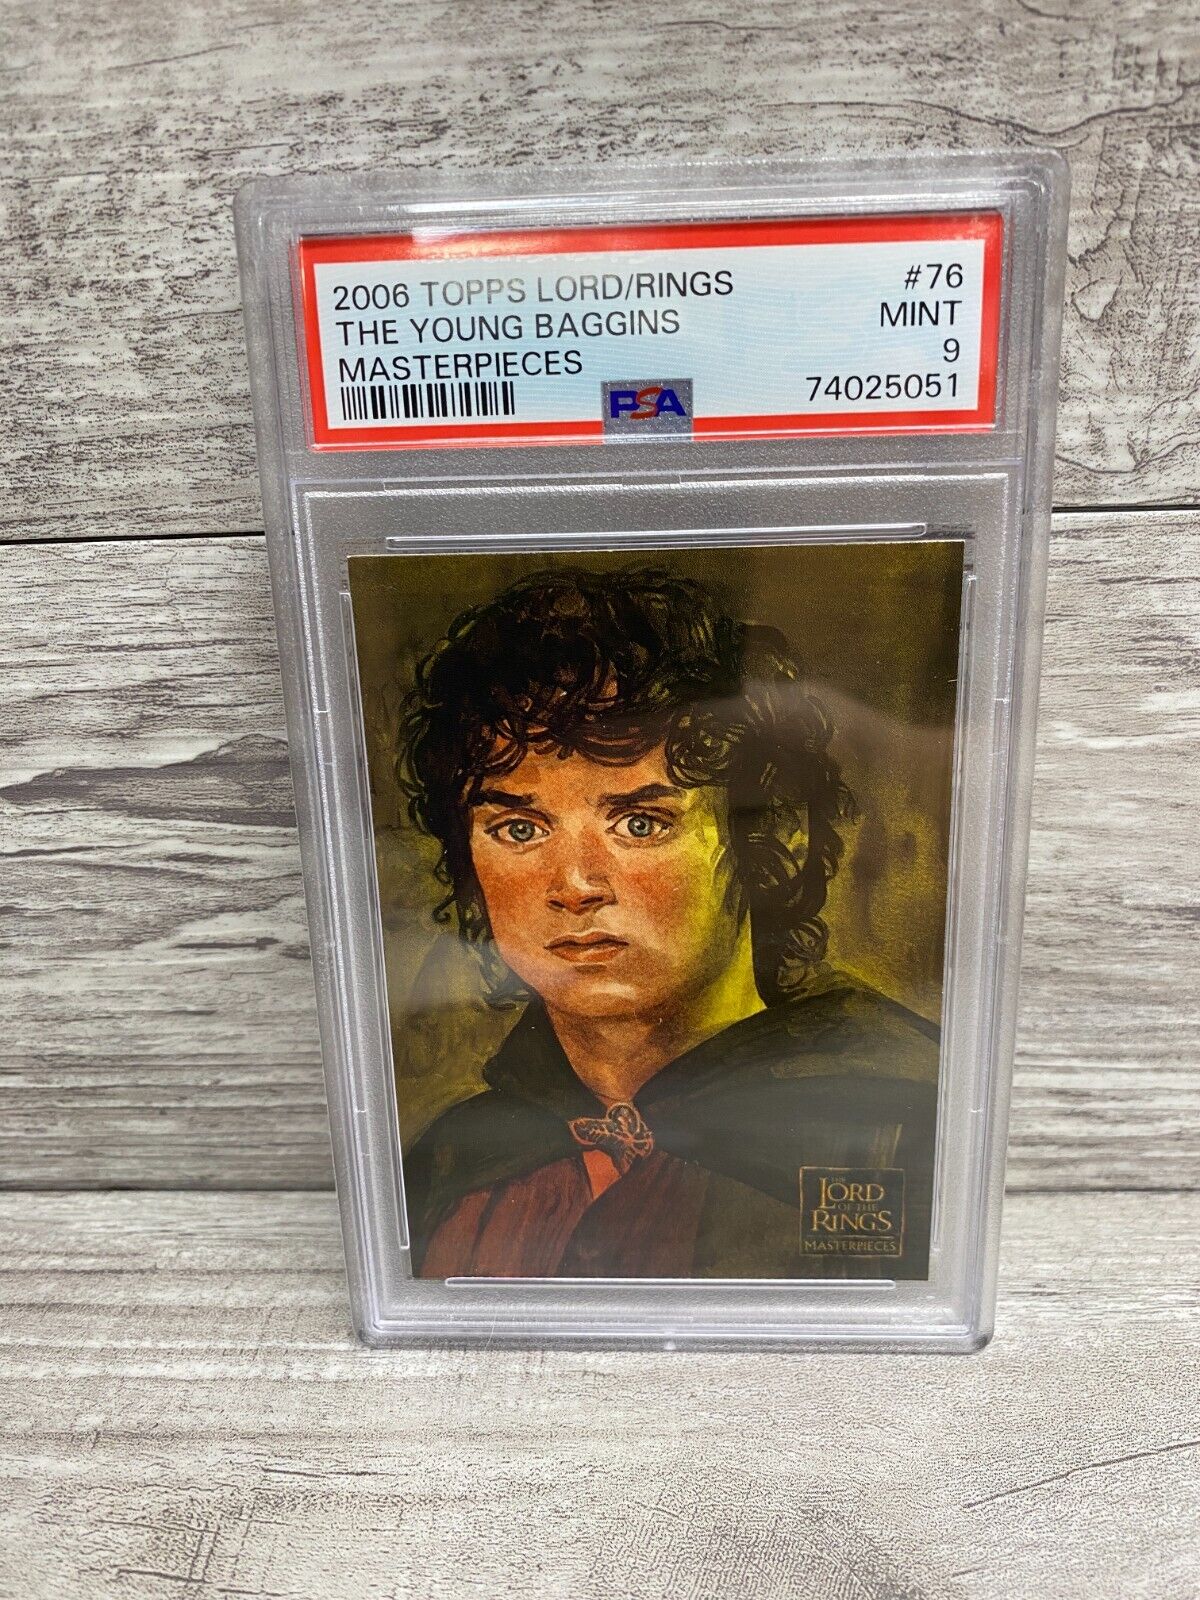 2006 Topps Lord of the Rings Masterpieces The Young Baggins Frodo #76 PSA 9 MINT